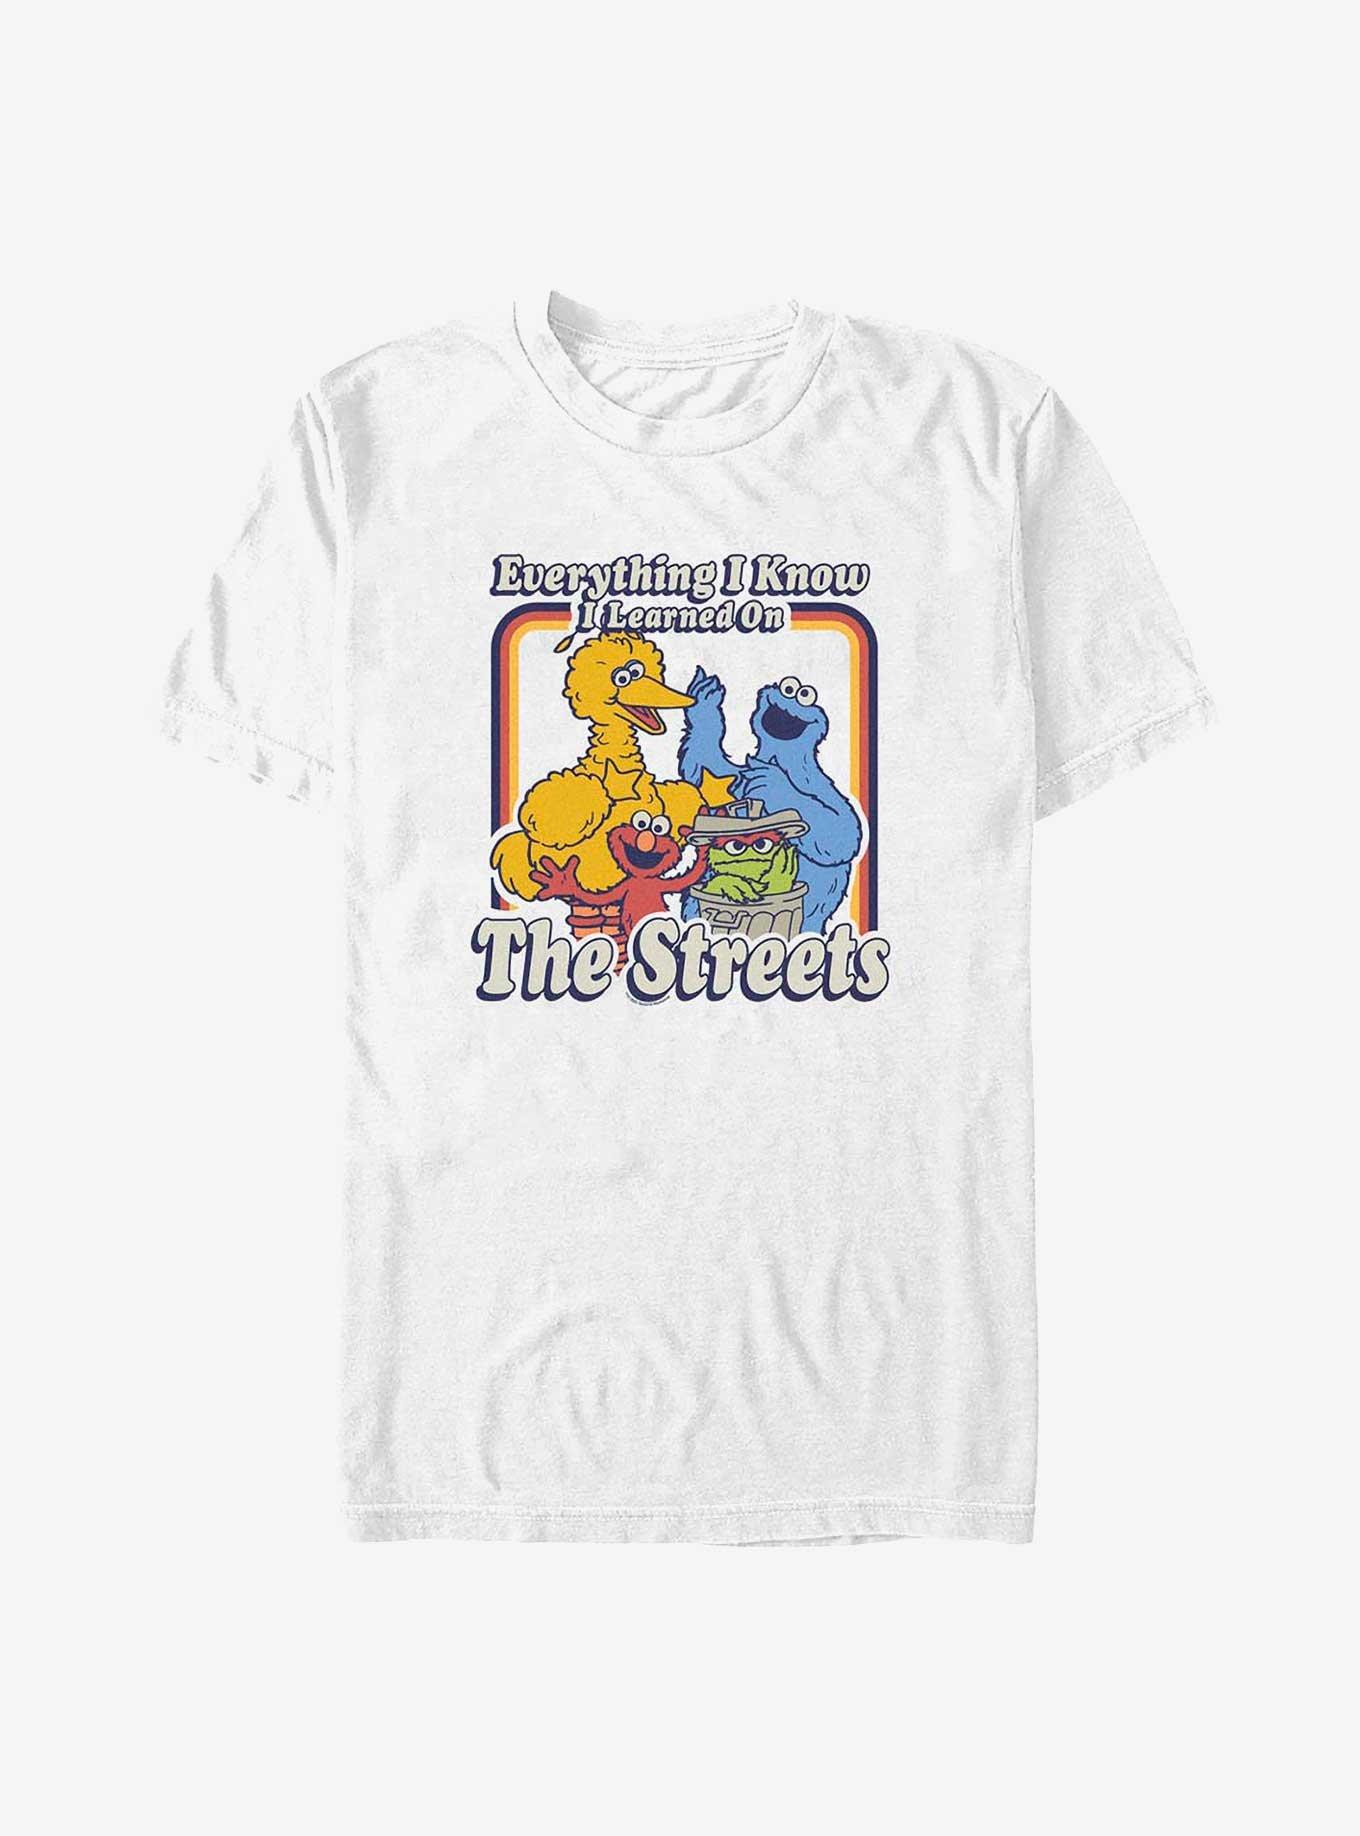 STREETS - Vintage Washed Street Fighter Anime Oversized T-Shirt